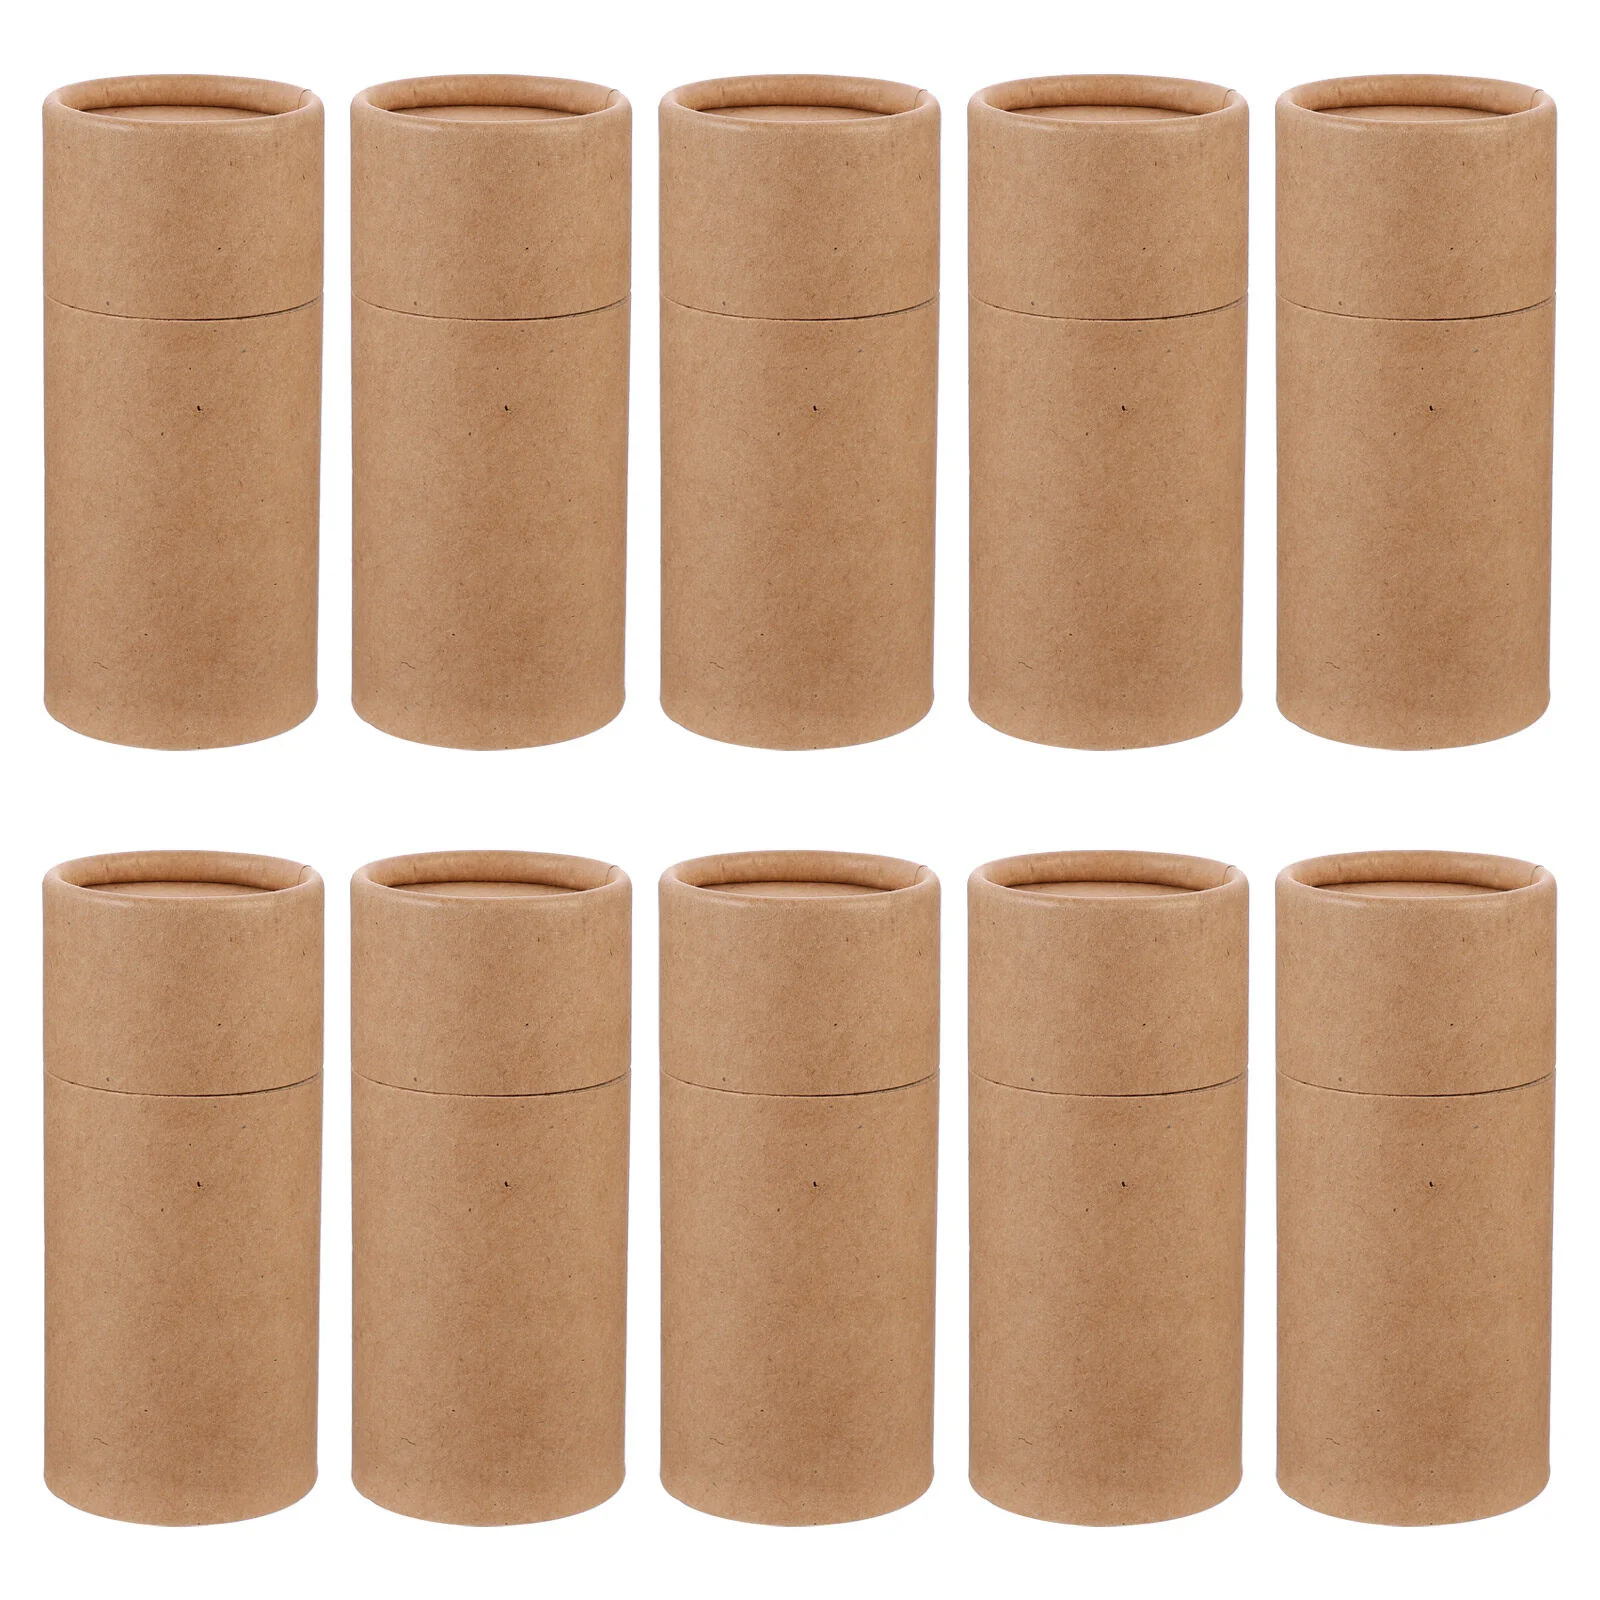 

10 Pcs Essential Oil Bottle Paper Tube Box Practical Gift Container Organizer Containers Bulk Deodorant Storage Cans Wrapping